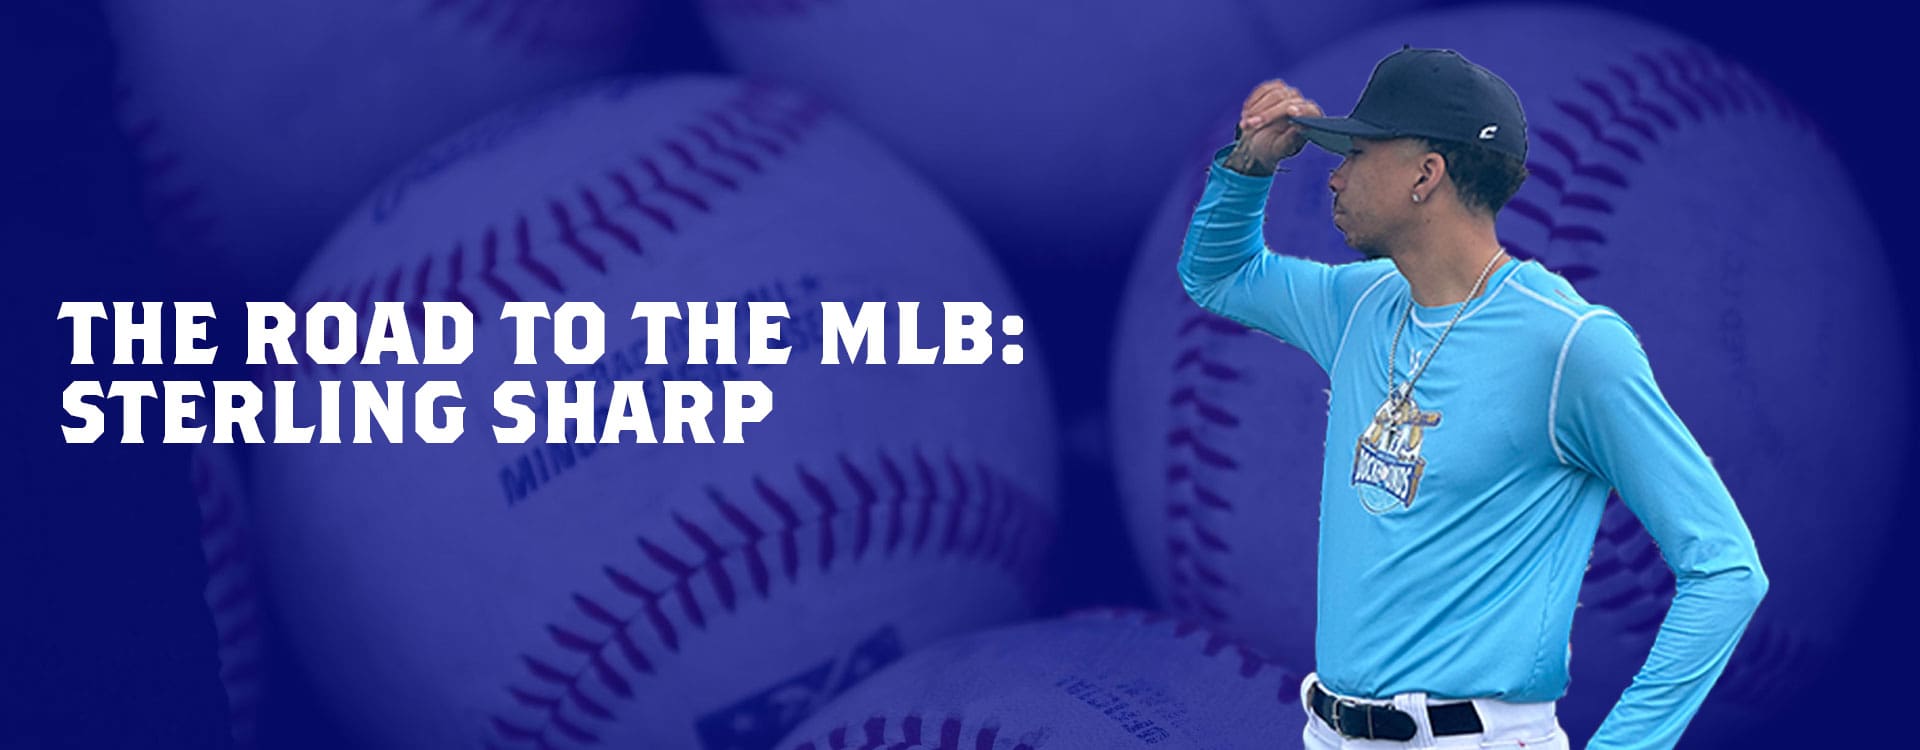 The road to the mlb with Sterling Sharp